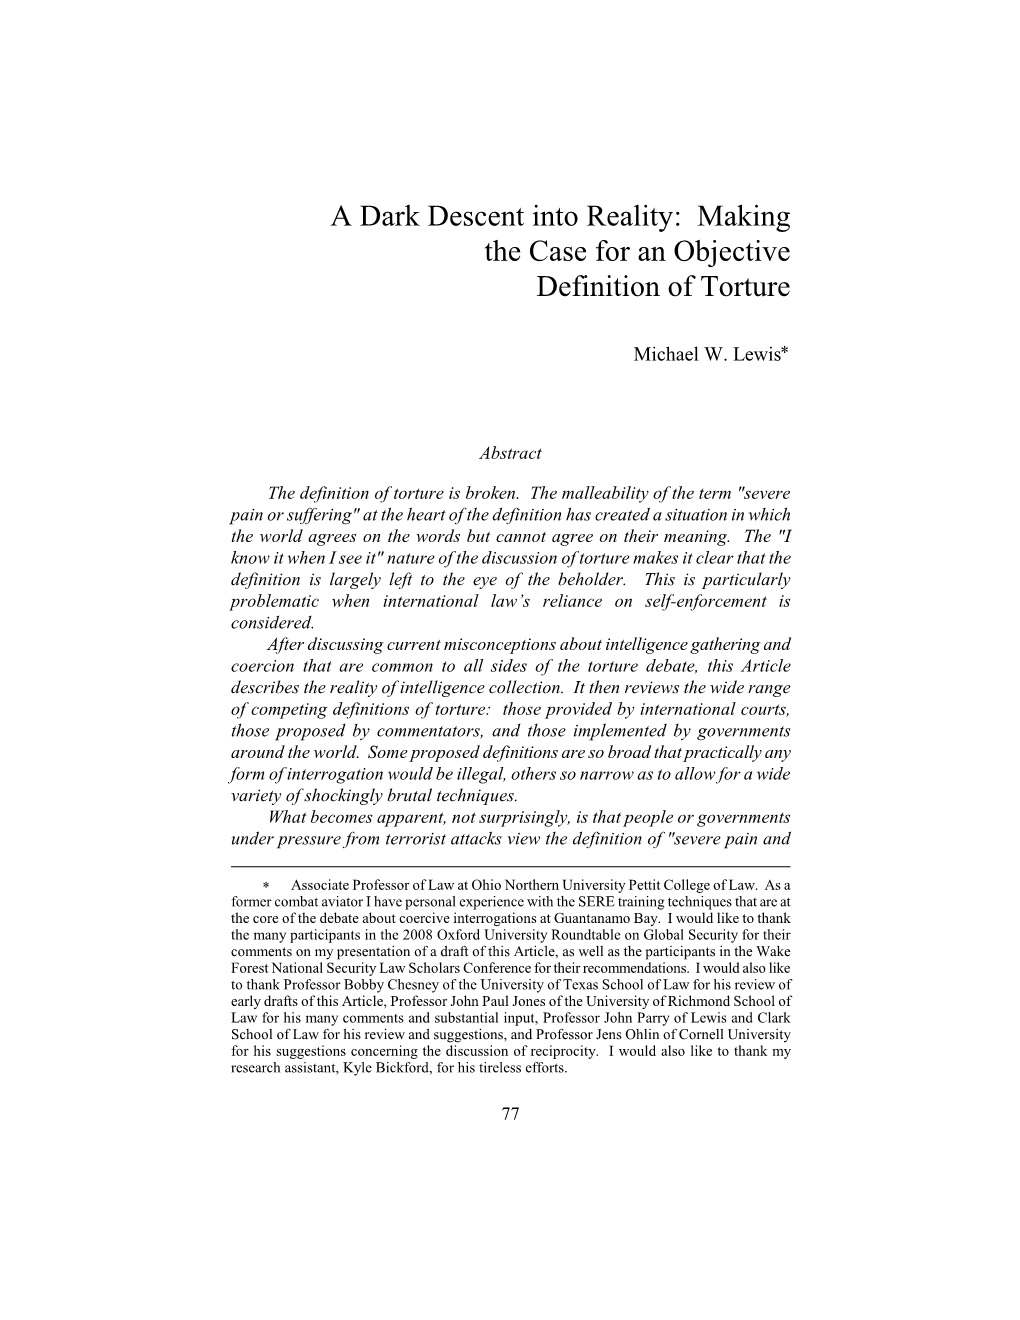 A Dark Descent Into Reality: Making the Case for an Objective Definition of Torture